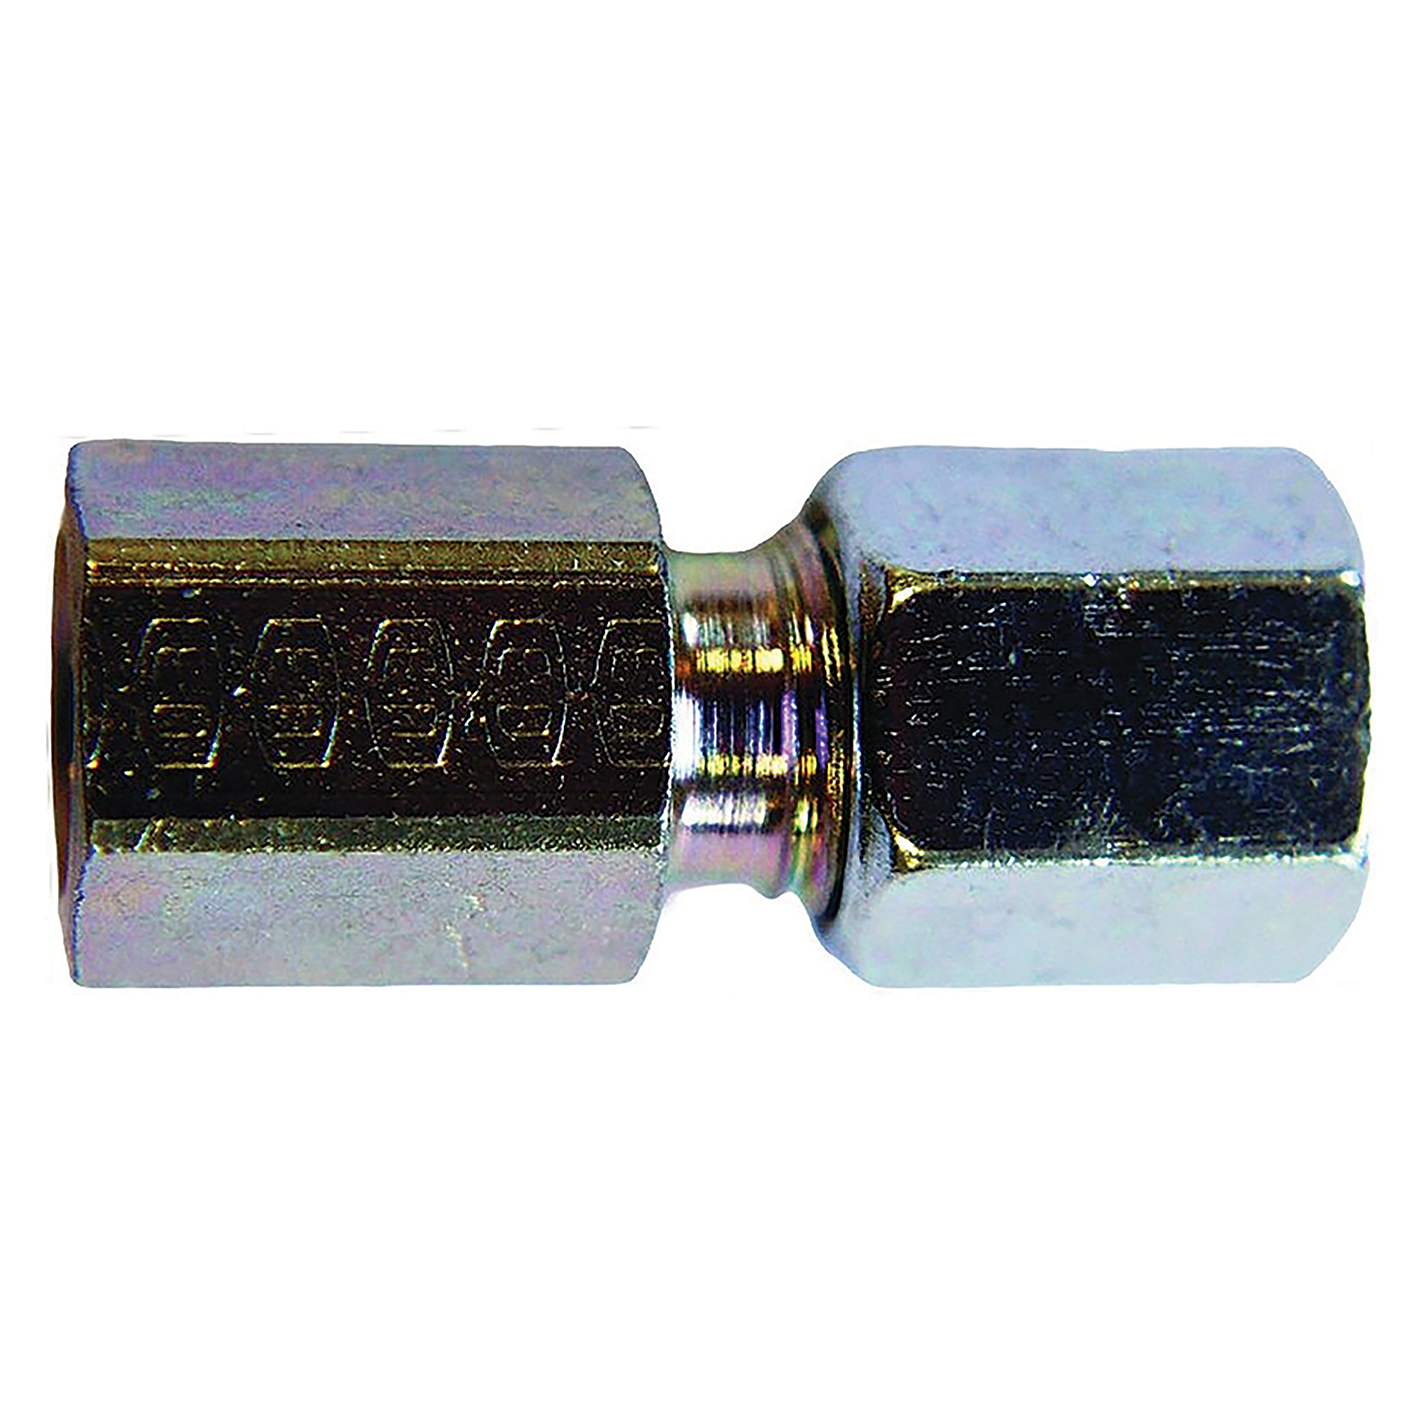 3/8" BSPP Female Female Connector 24° Cone End